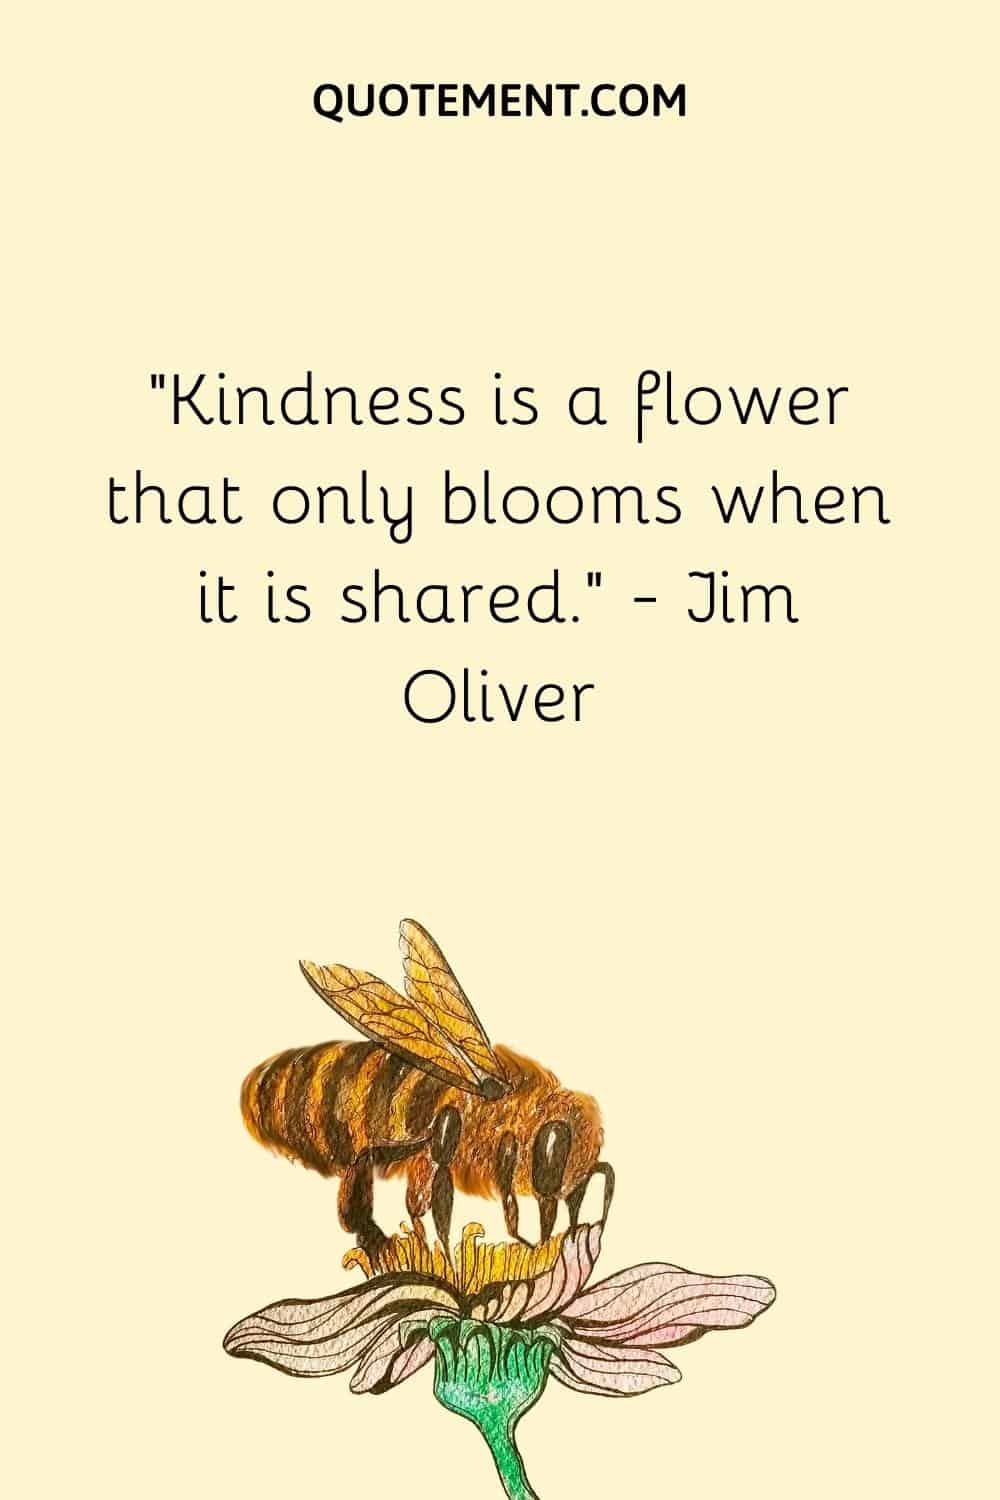 “Kindness is a flower that only blooms when it is shared.” — Jim Oliver